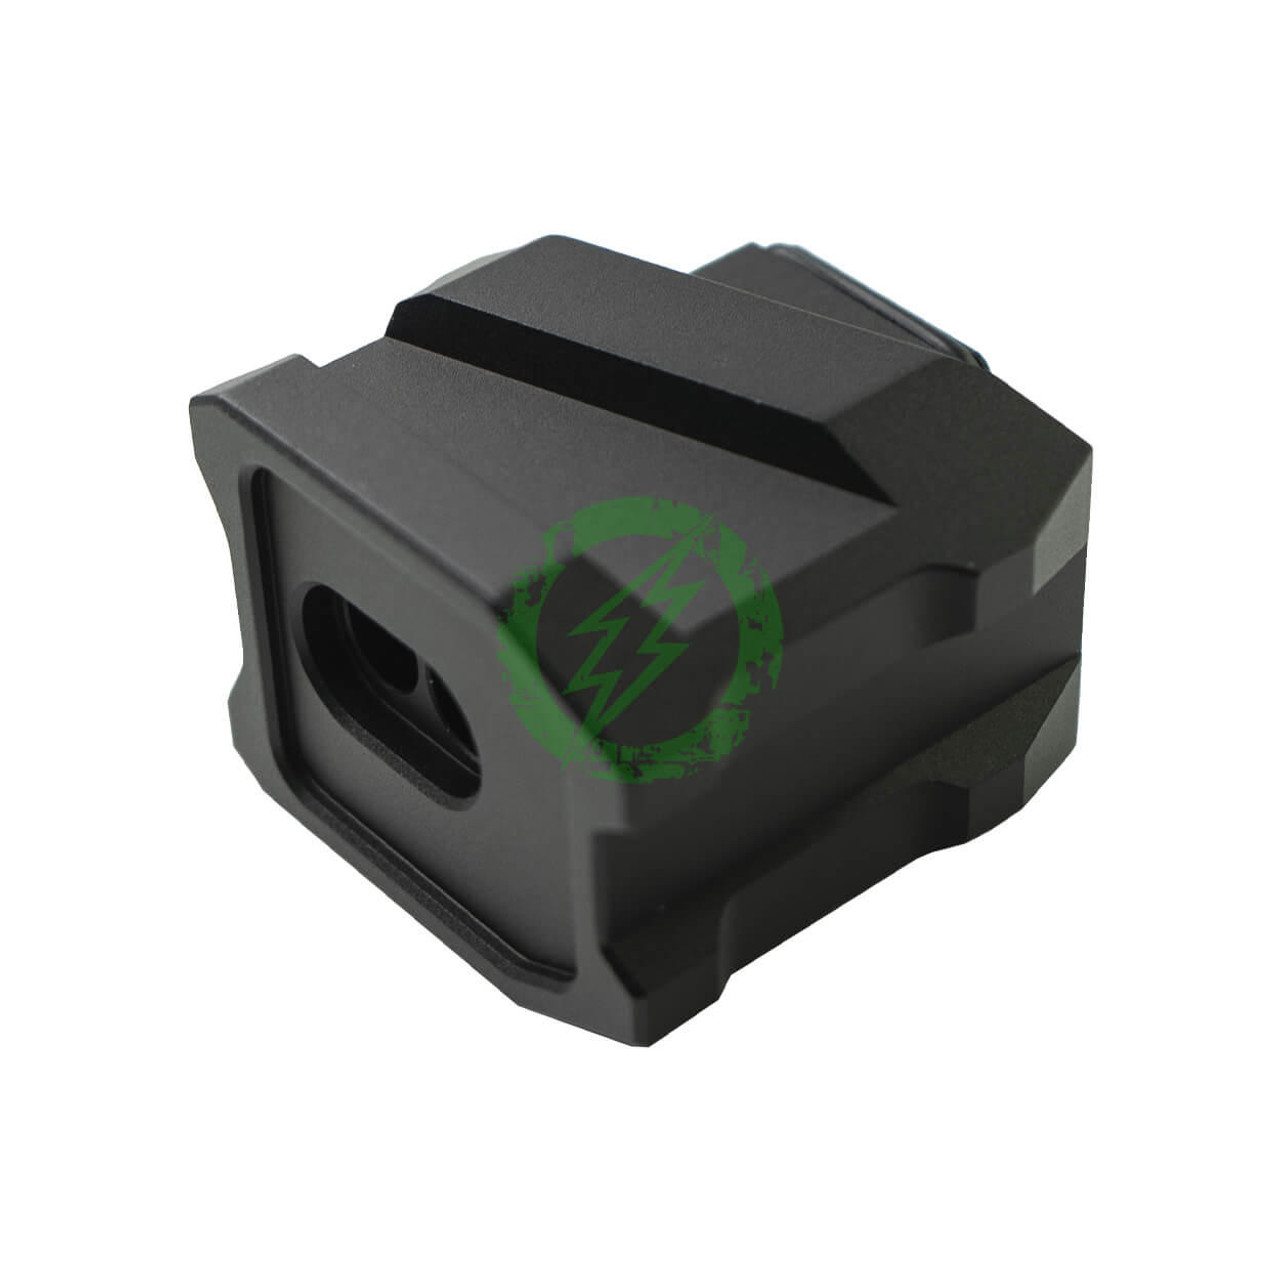  CTM TAC Magazine Extension Plate for AAP-01 